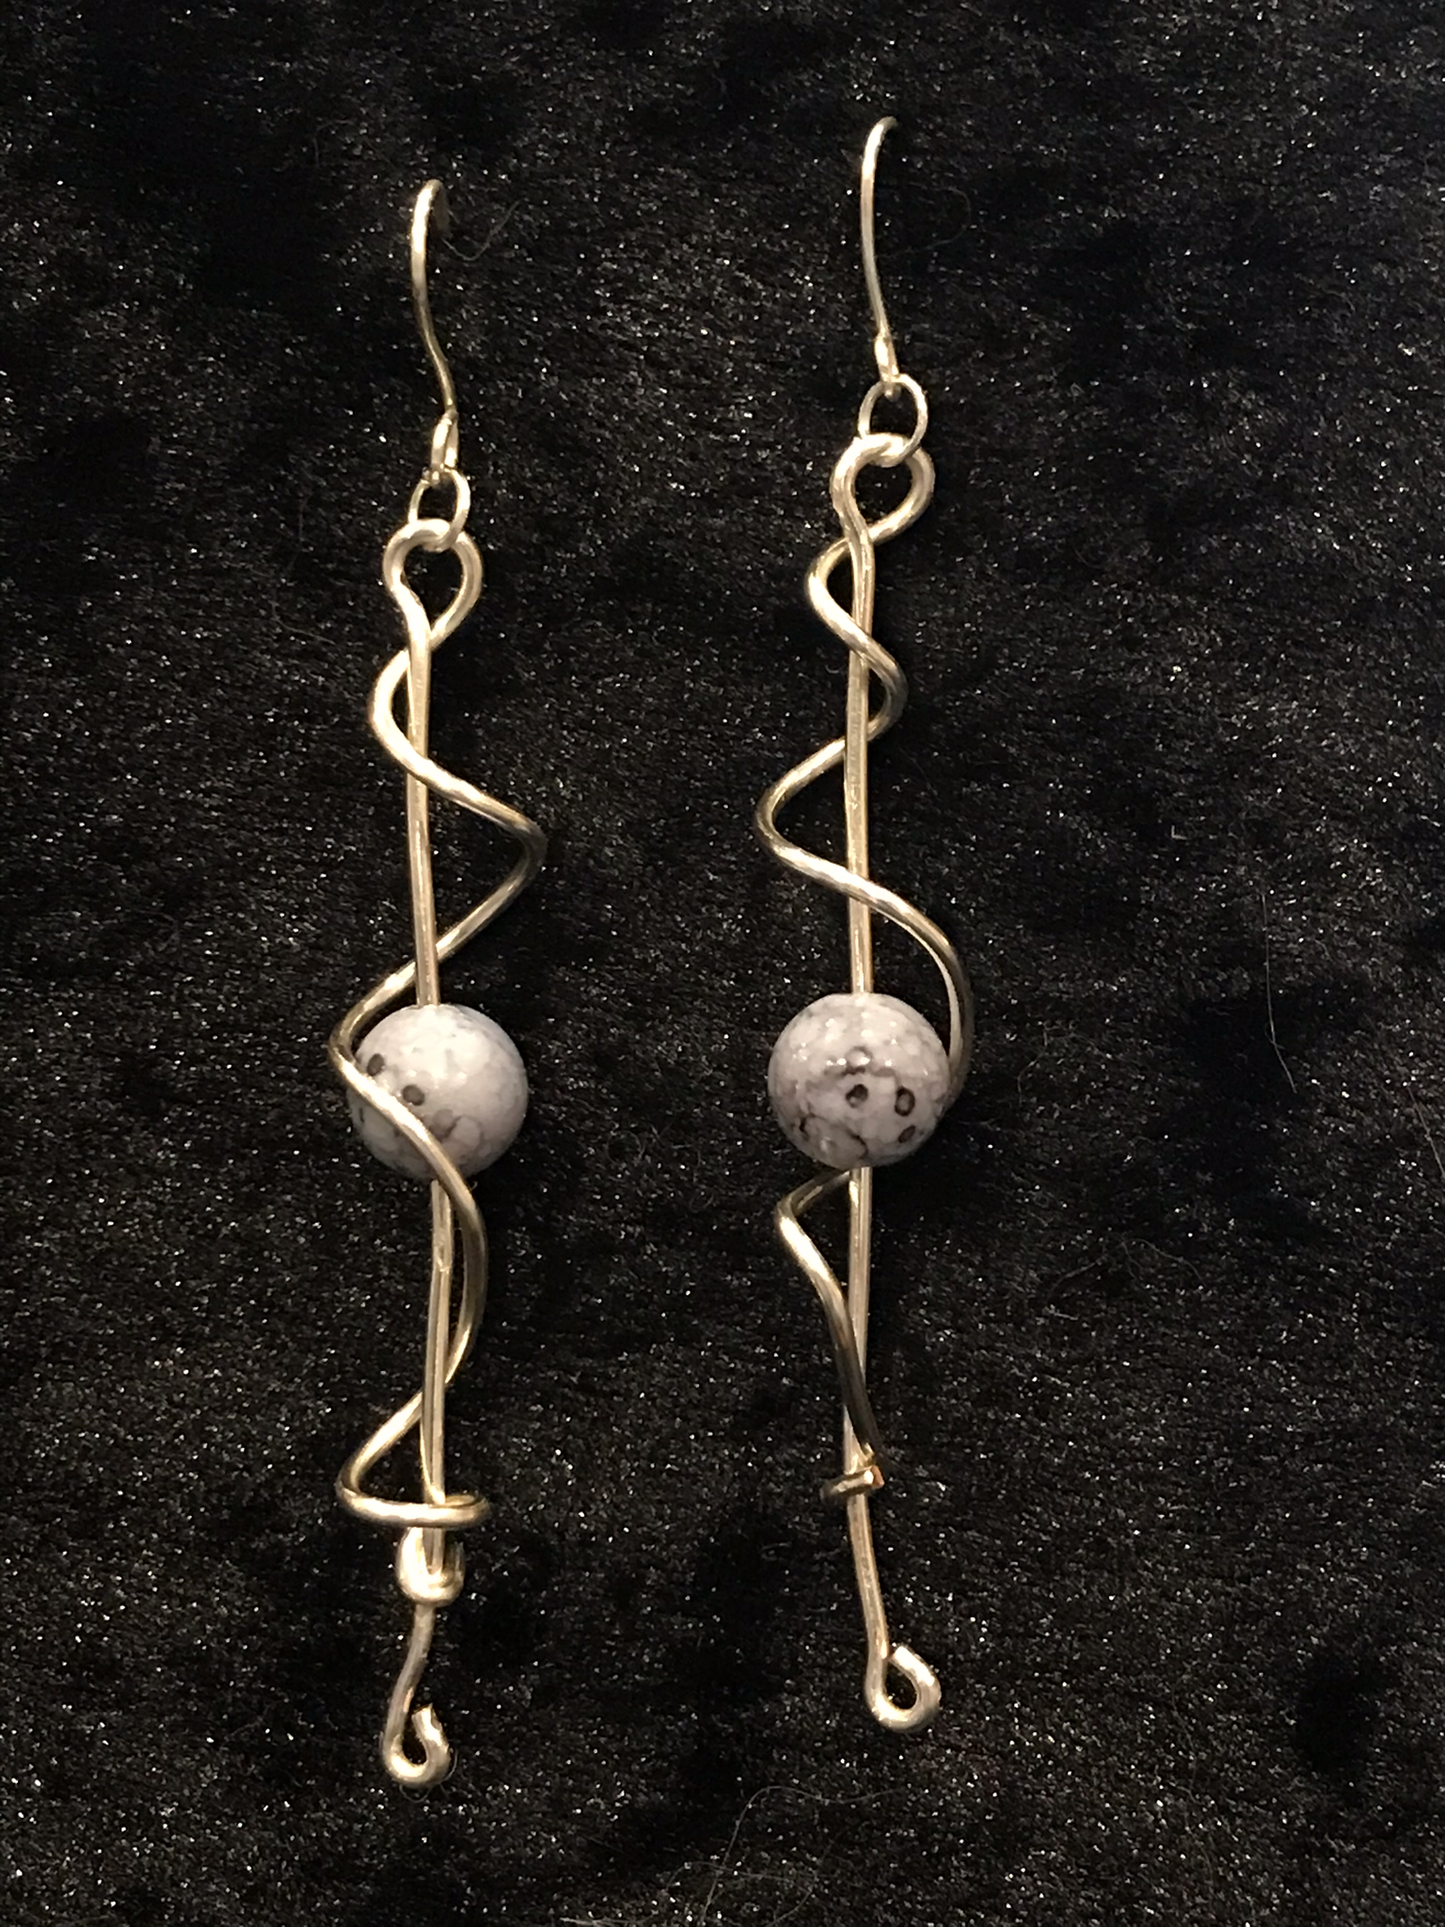 Wire & grey bead earrings with large silver wire twist